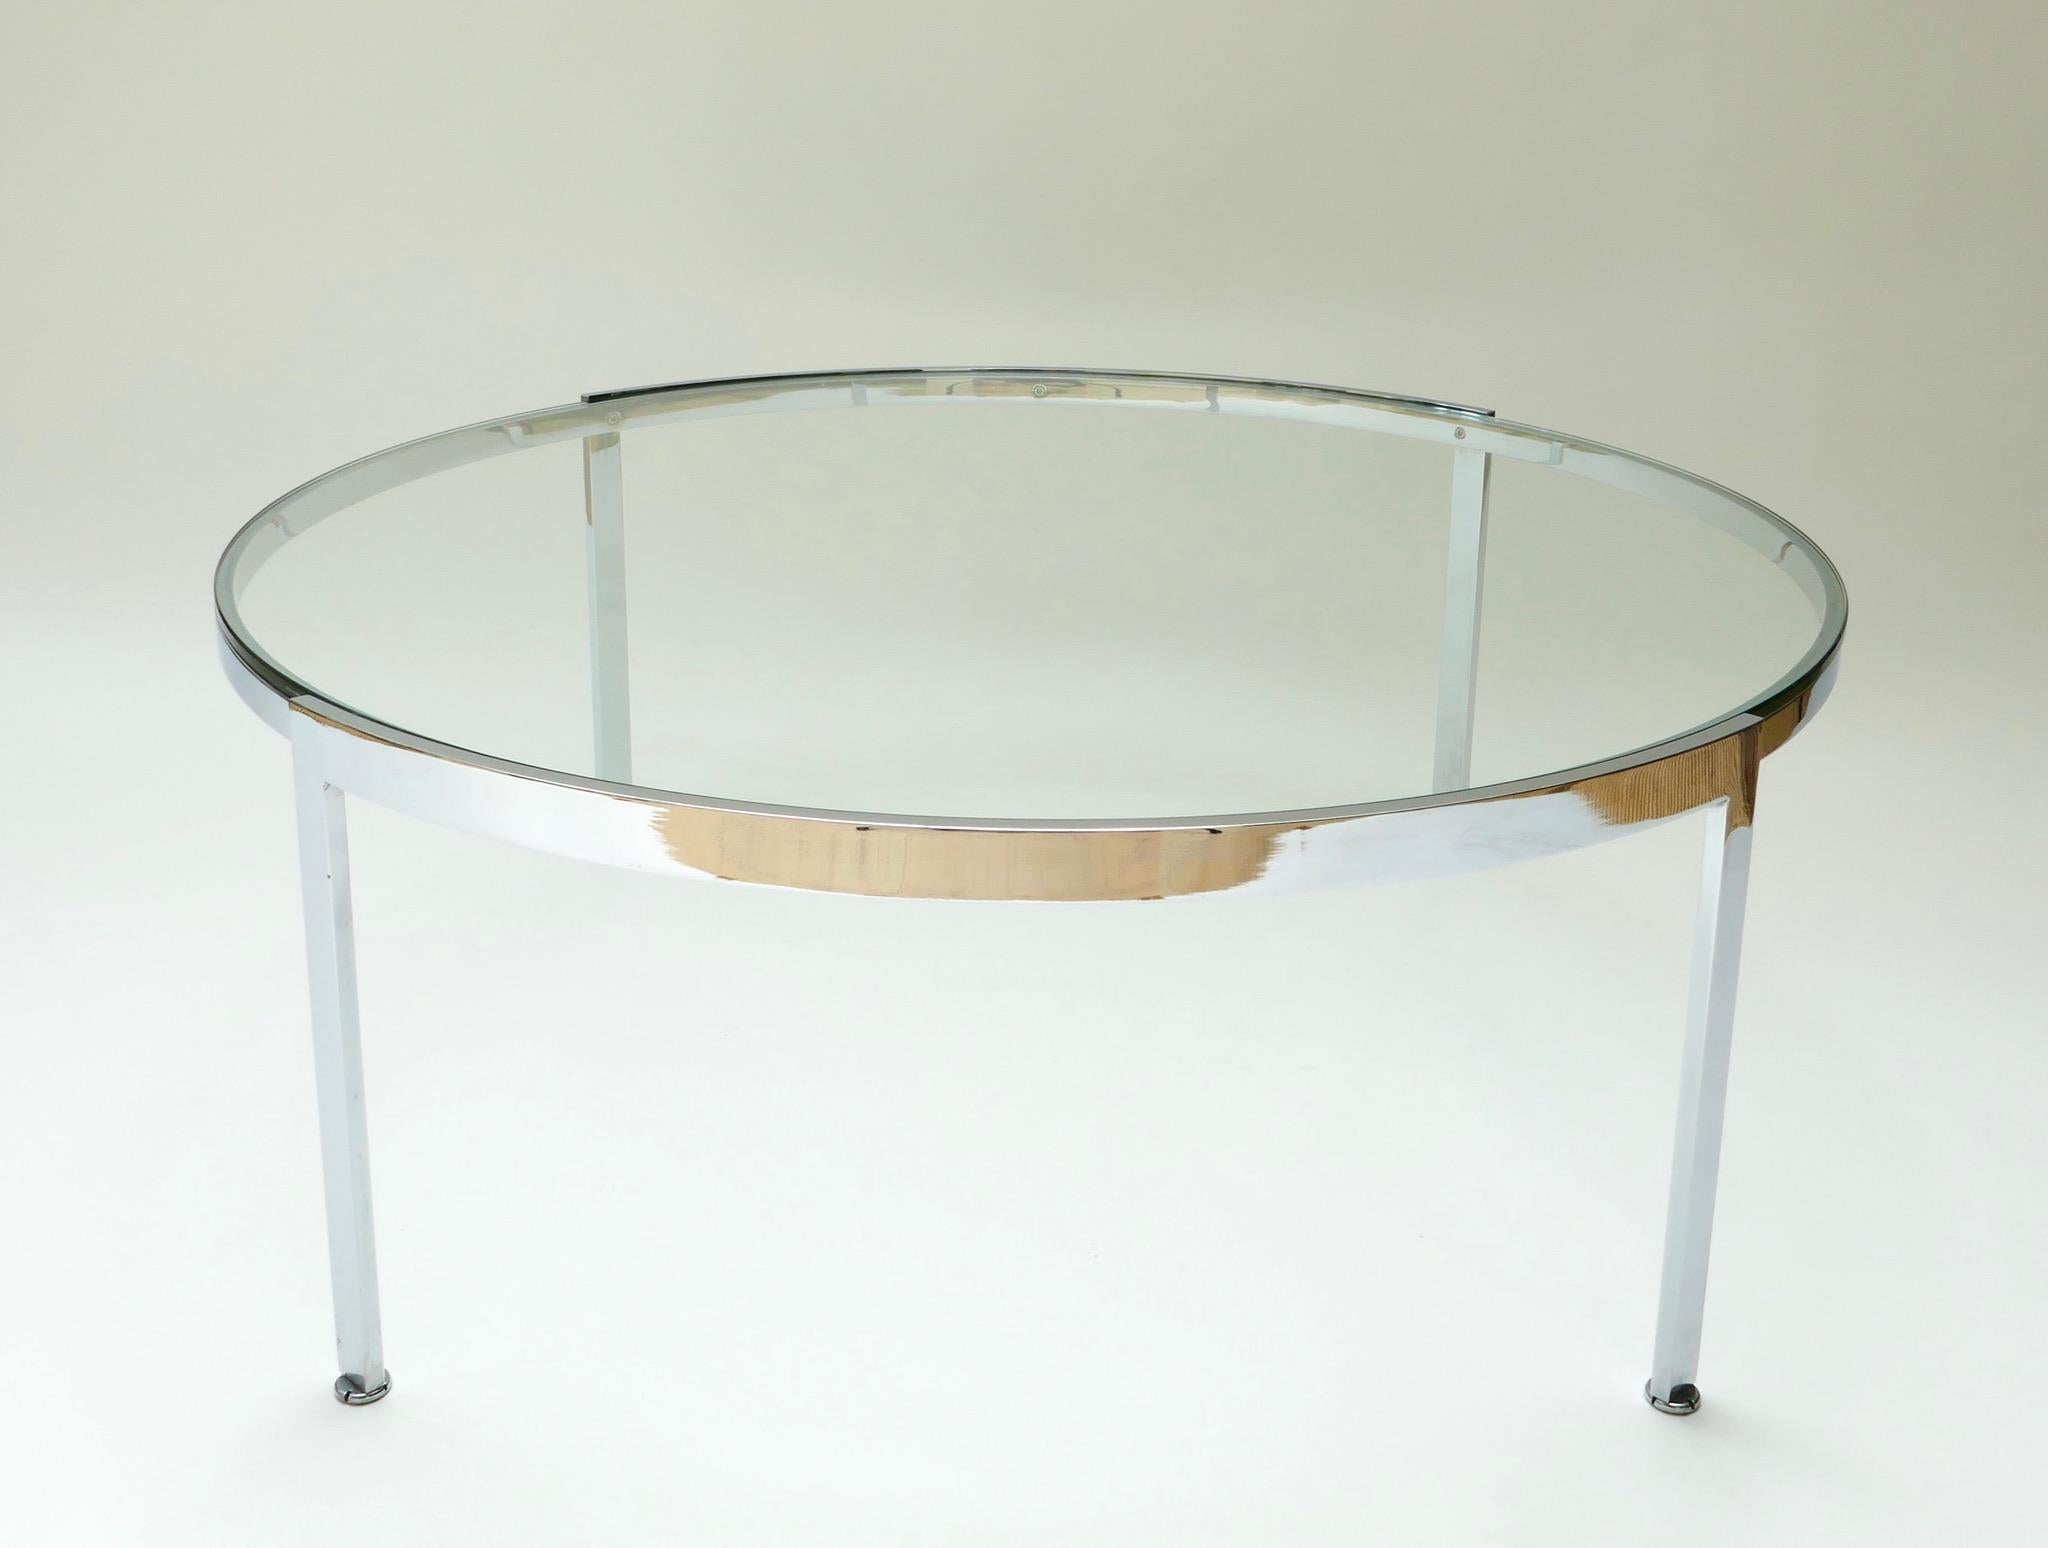 High quality large chrome and glass round low table, Italy, 1970s.